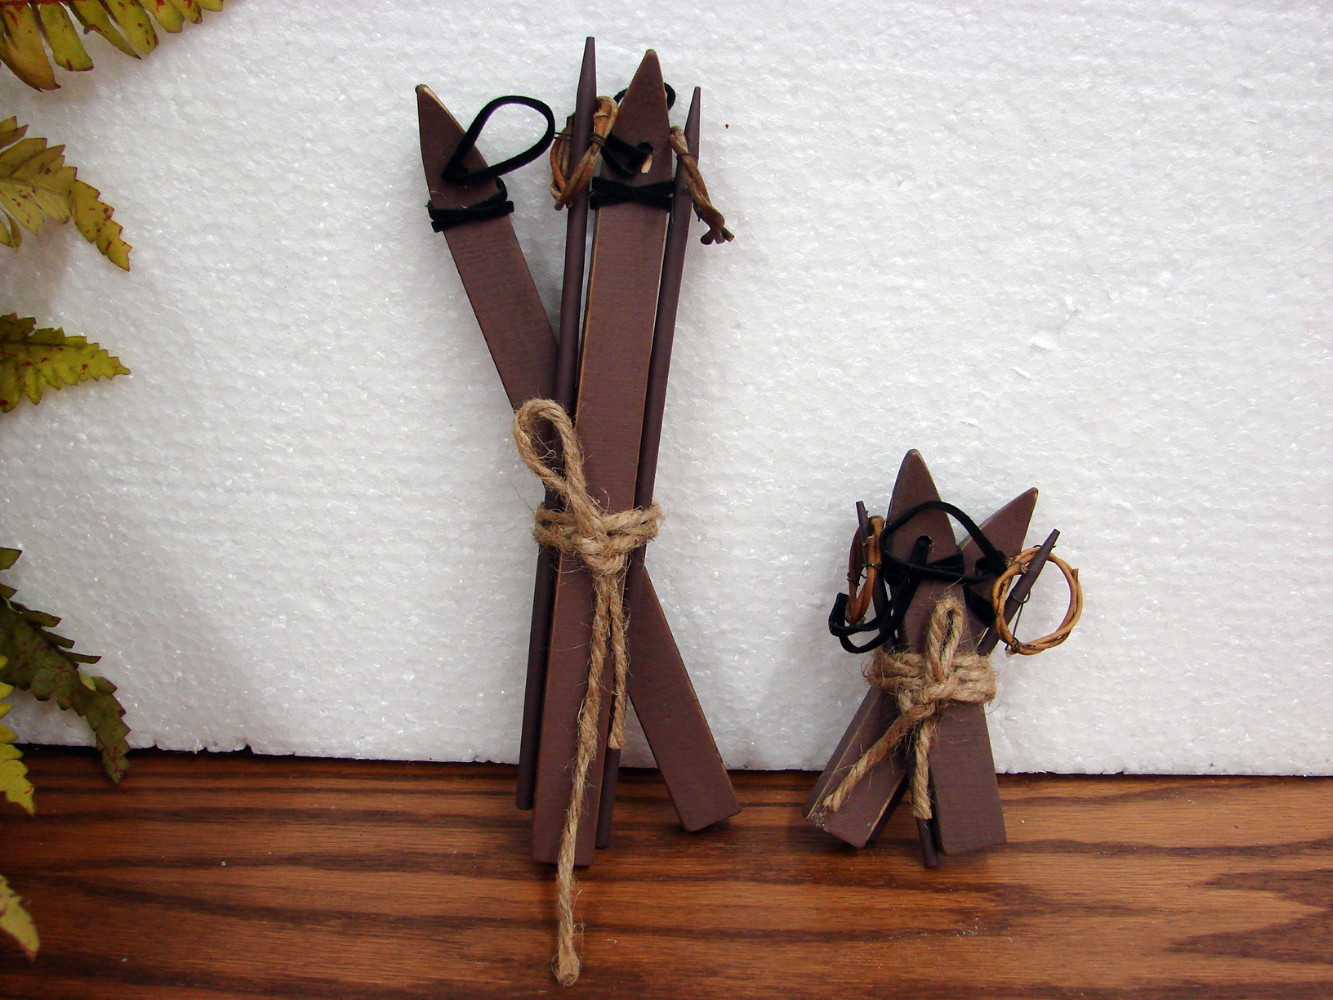 Miniature Wooden Folk Skis and Ski Poles Set - Christmas Miniatures -  Christmas and Winter - Holiday Crafts